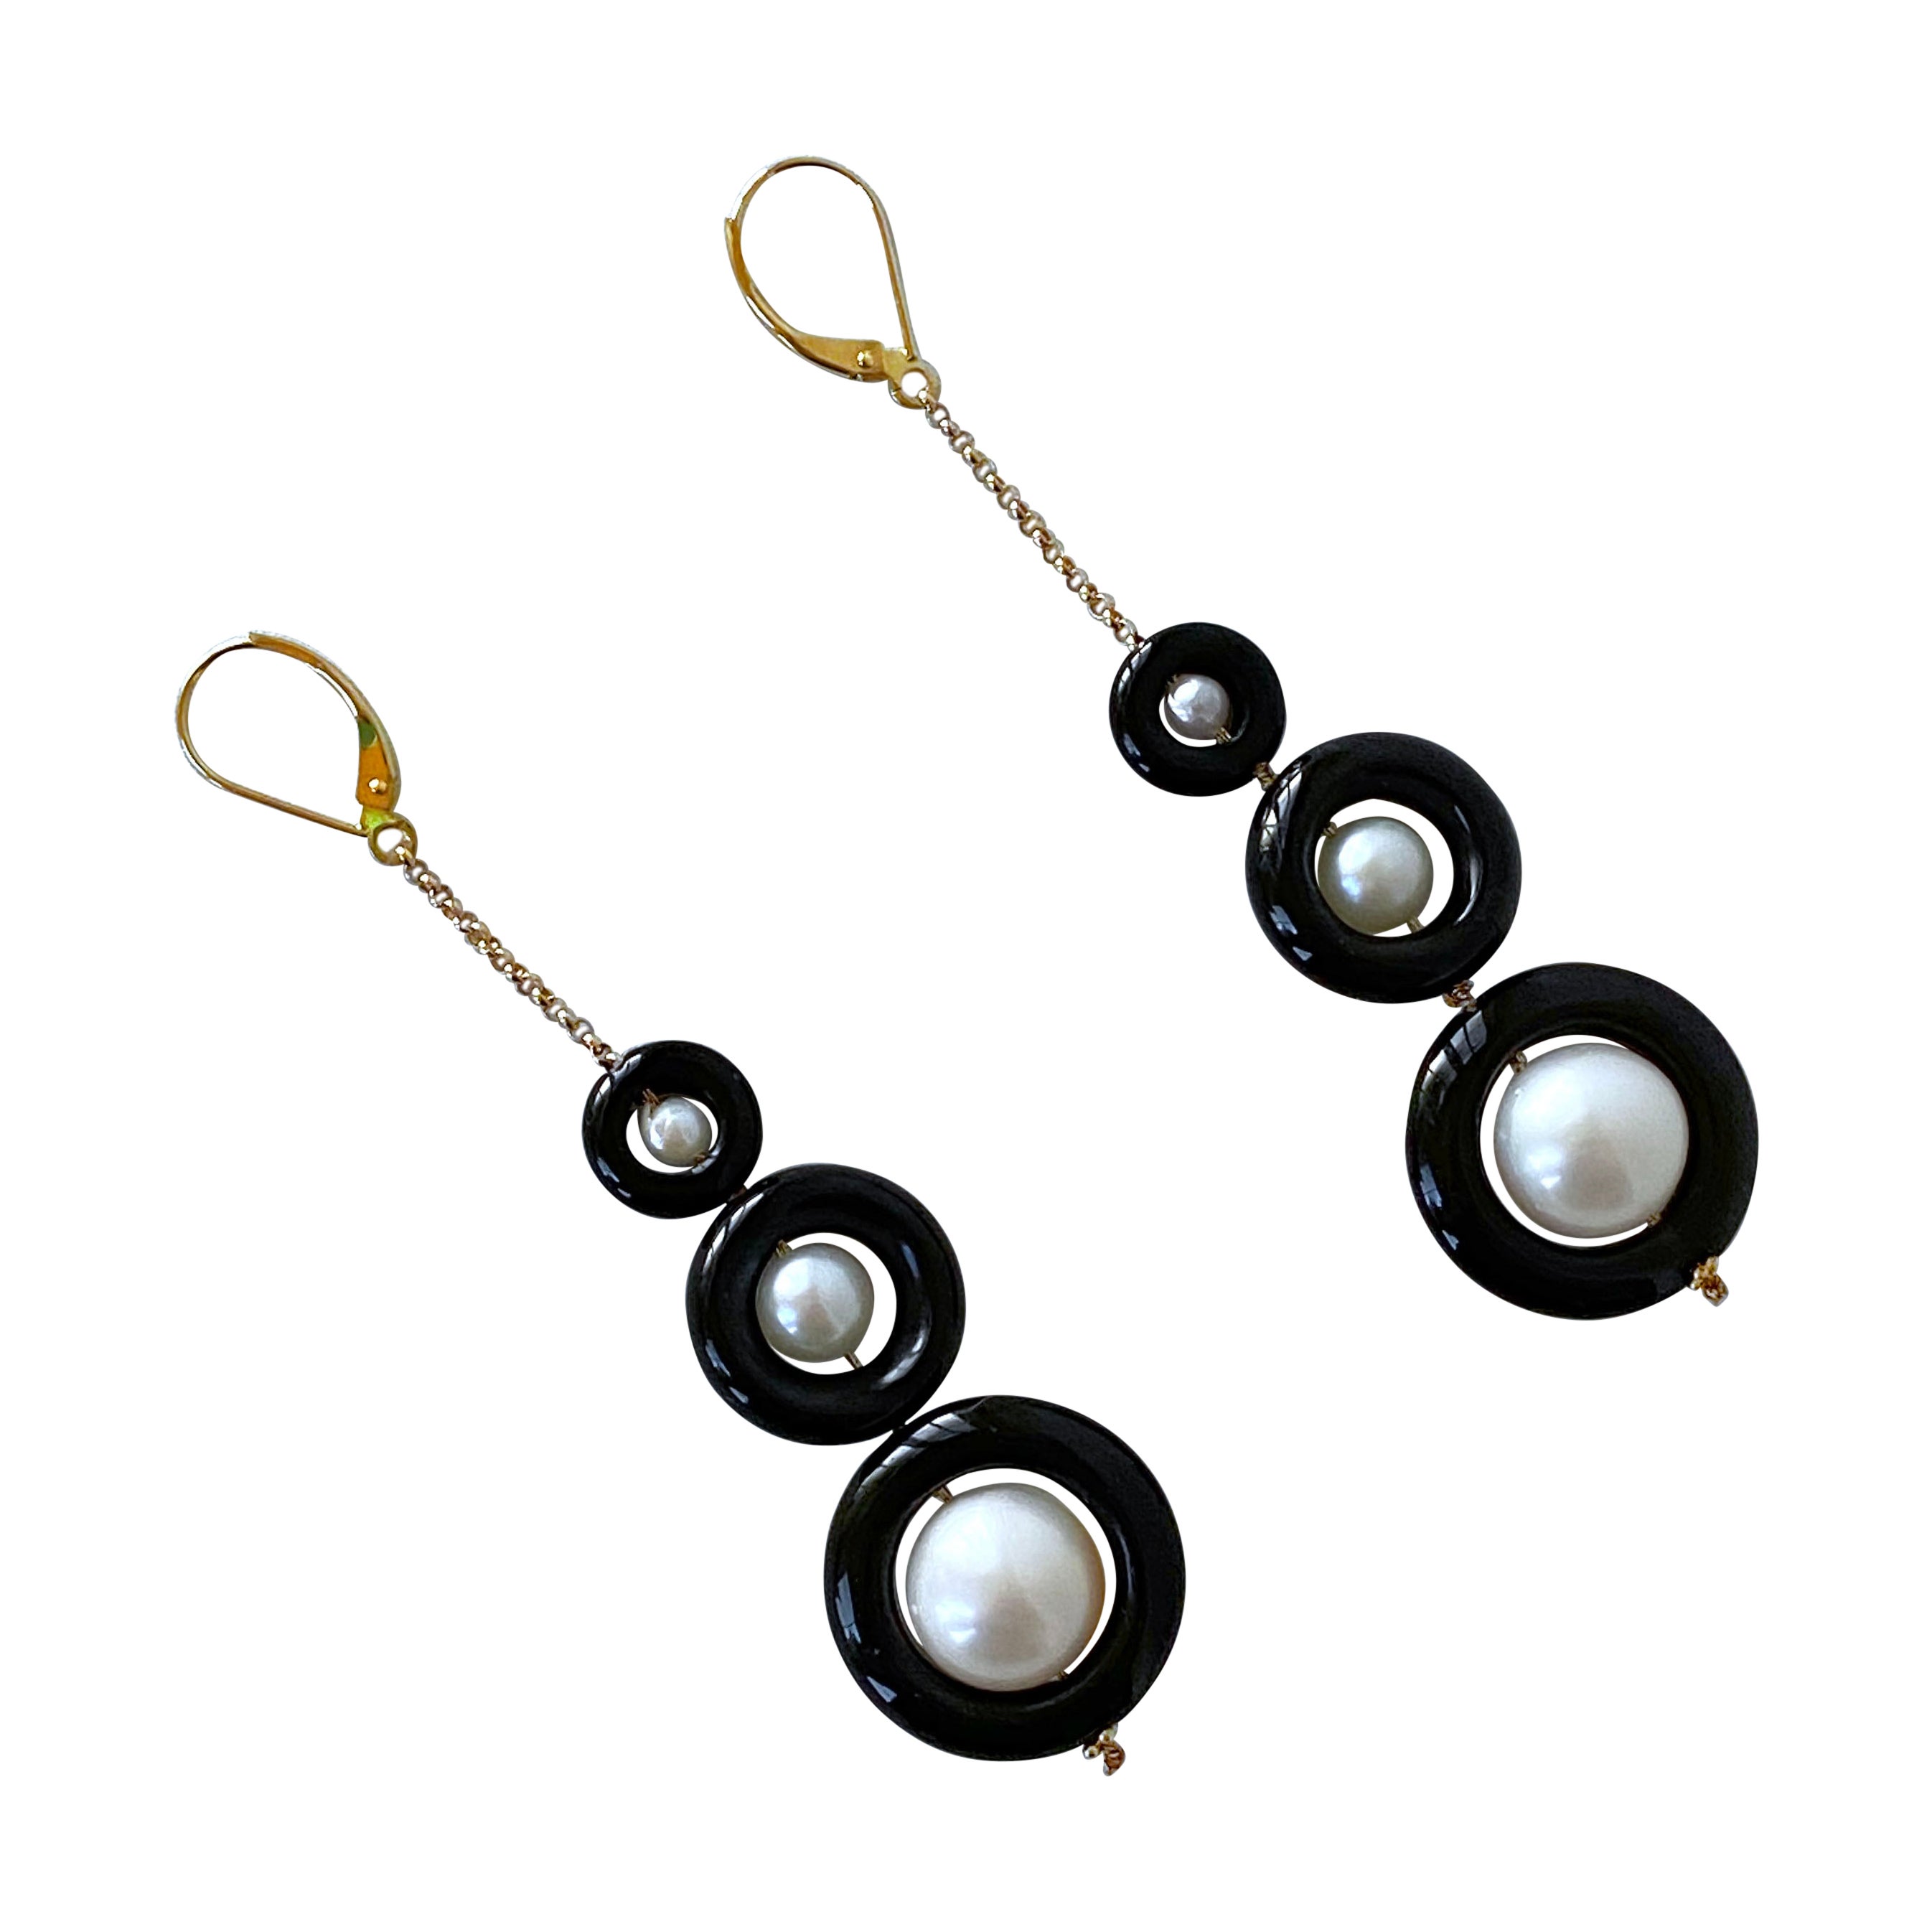 Marina J. 3 Tier Pearl, Black Onyx & Solid 14k Yellow Gold Graduated Earrings For Sale